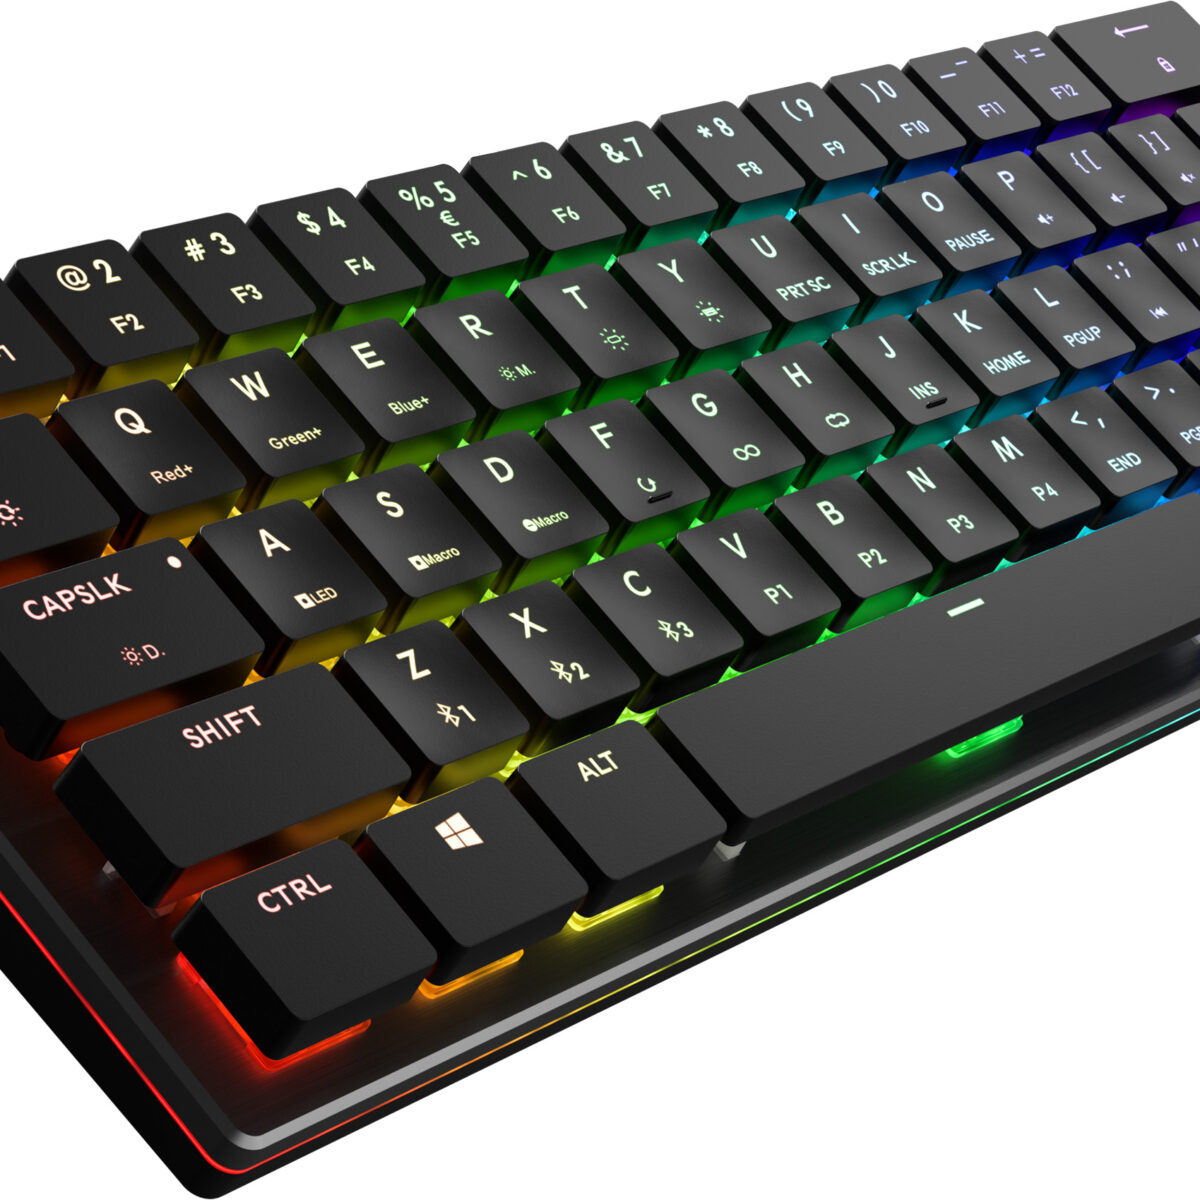 Cooler Master SK621 Bluetooth Compact Keyboard